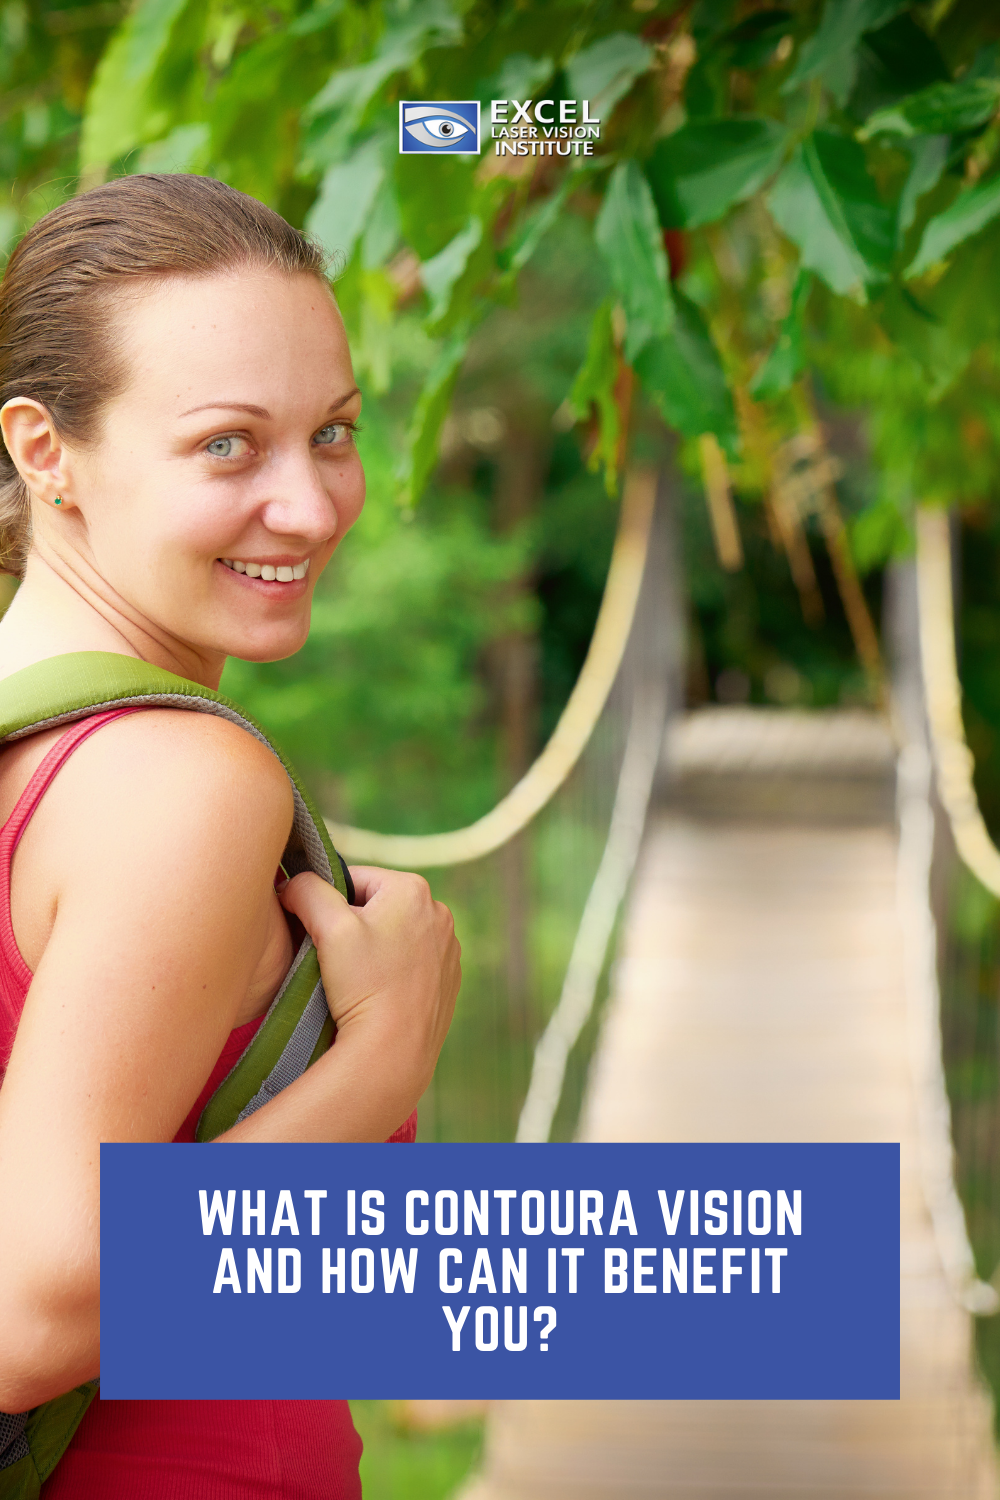 Contoura Vision is a contemporary method of Lasik Los Angeles eye surgery for clear Vision